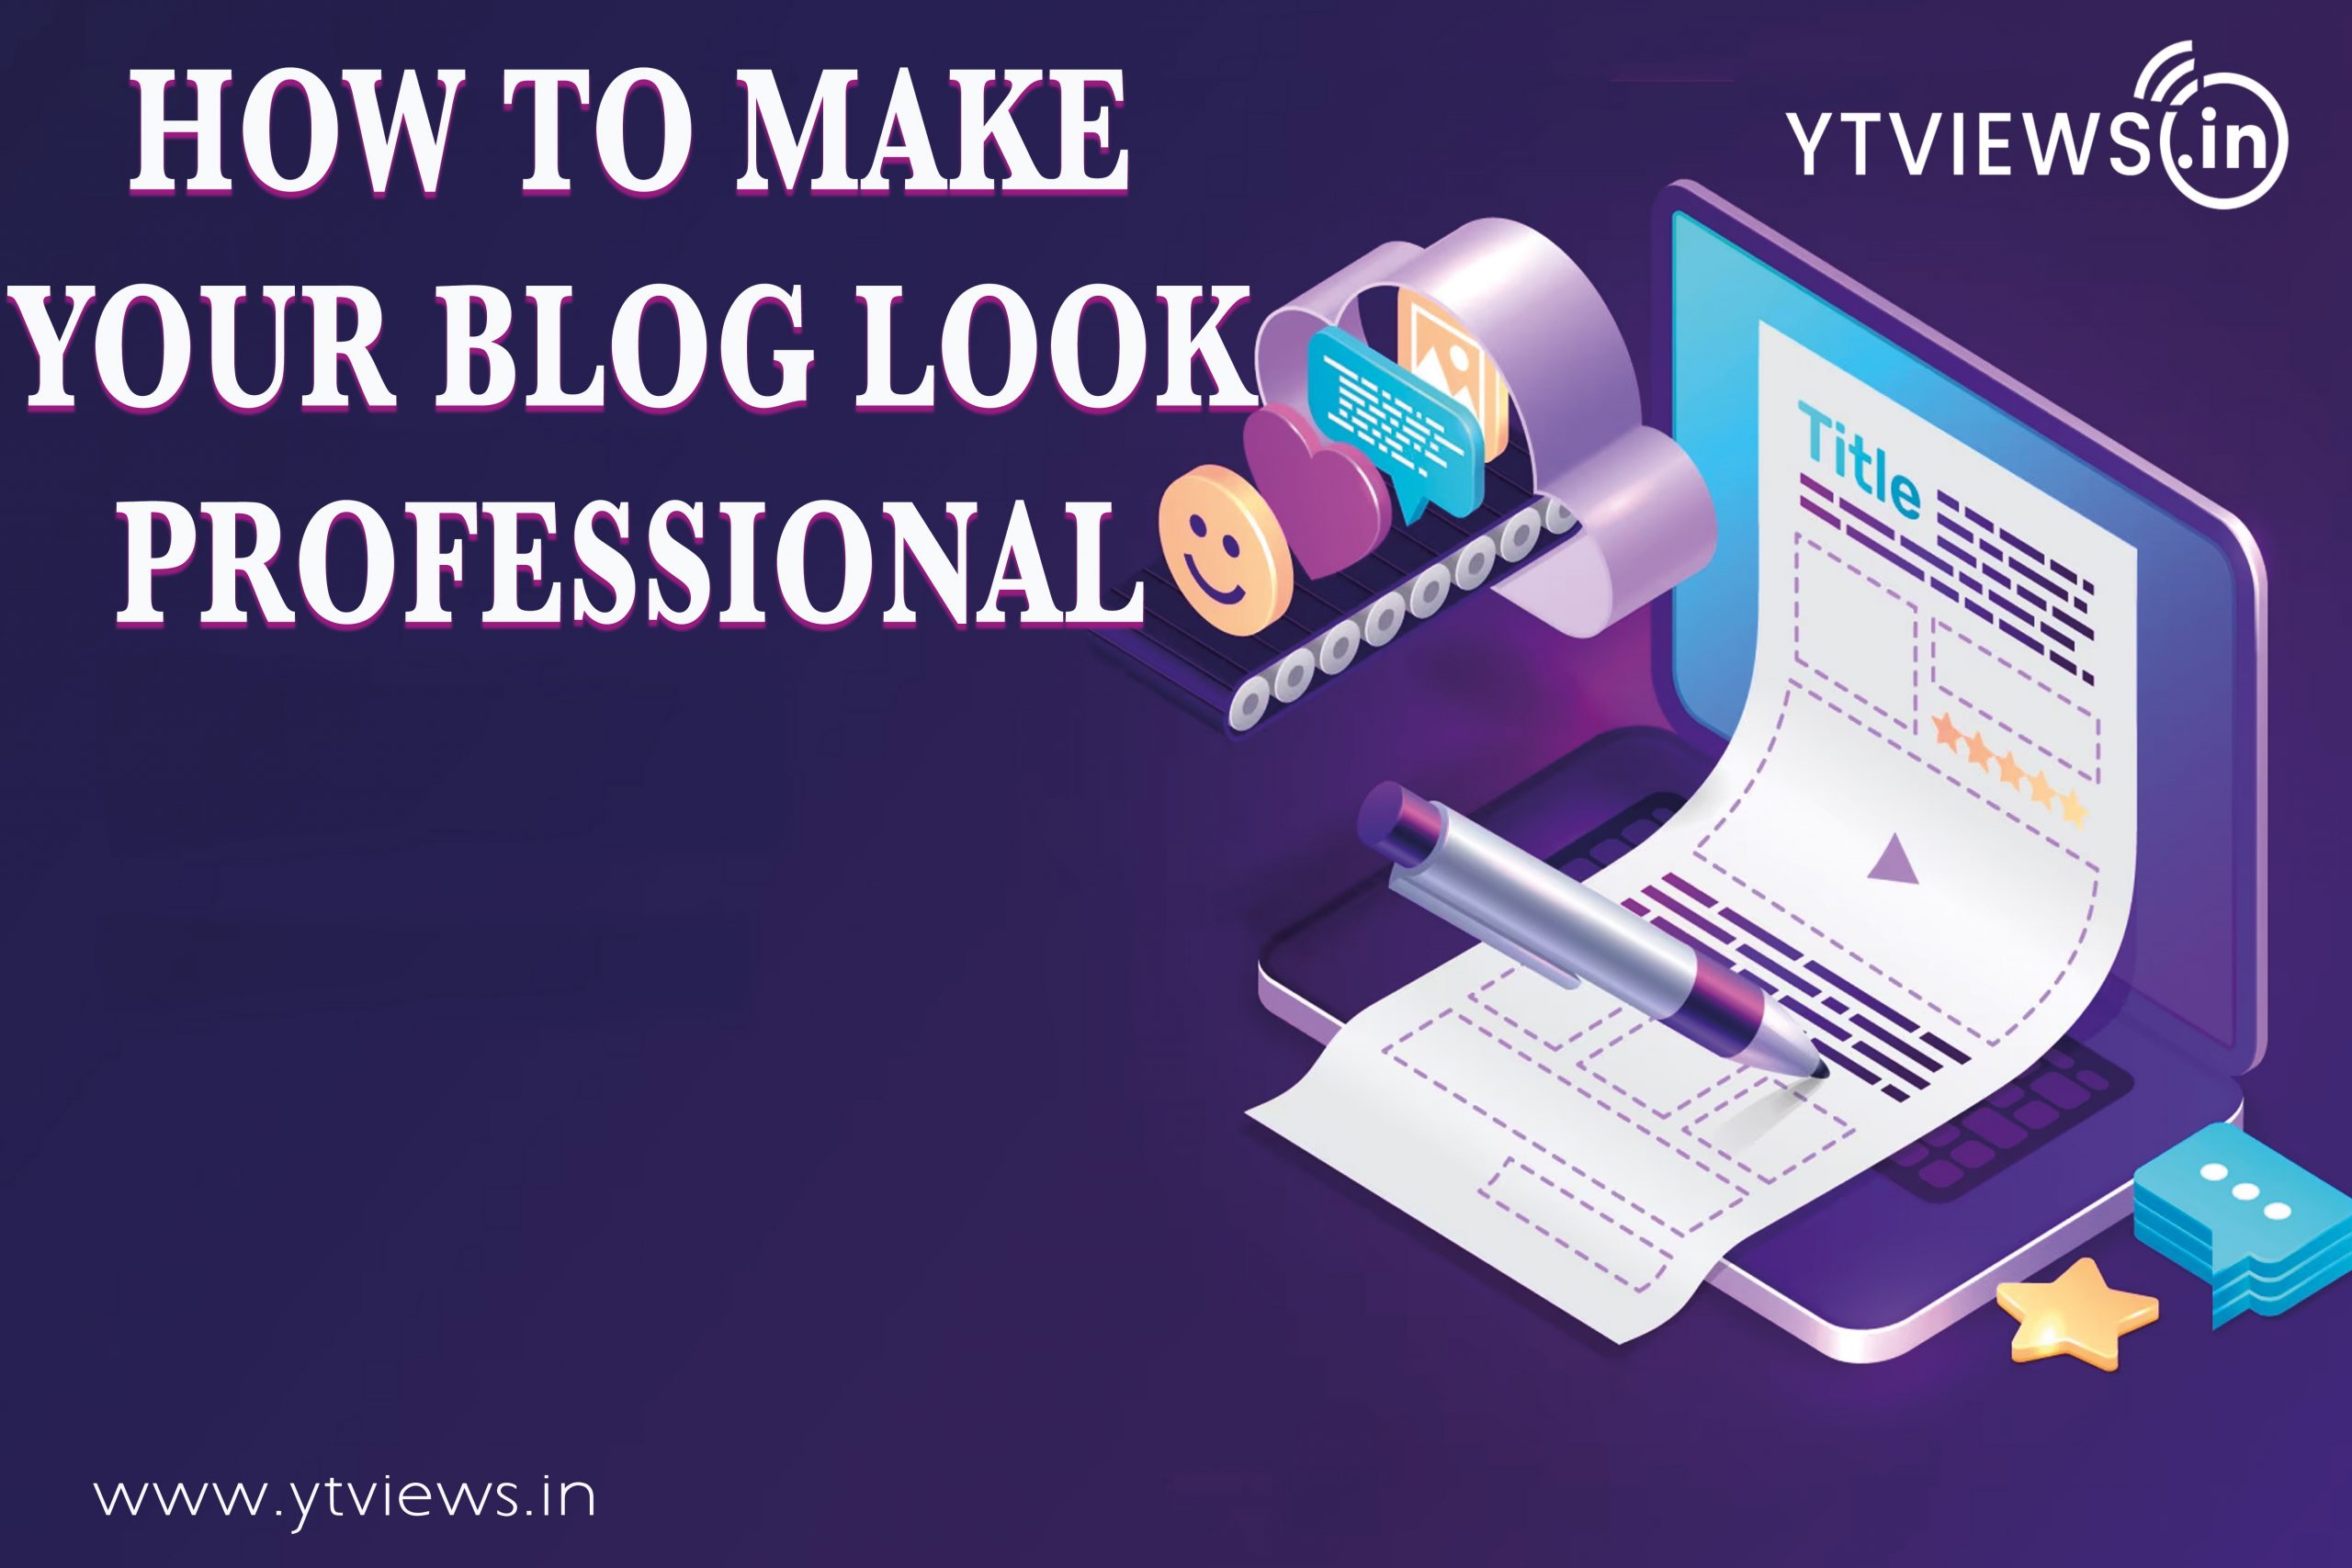 How to make your blog look professional